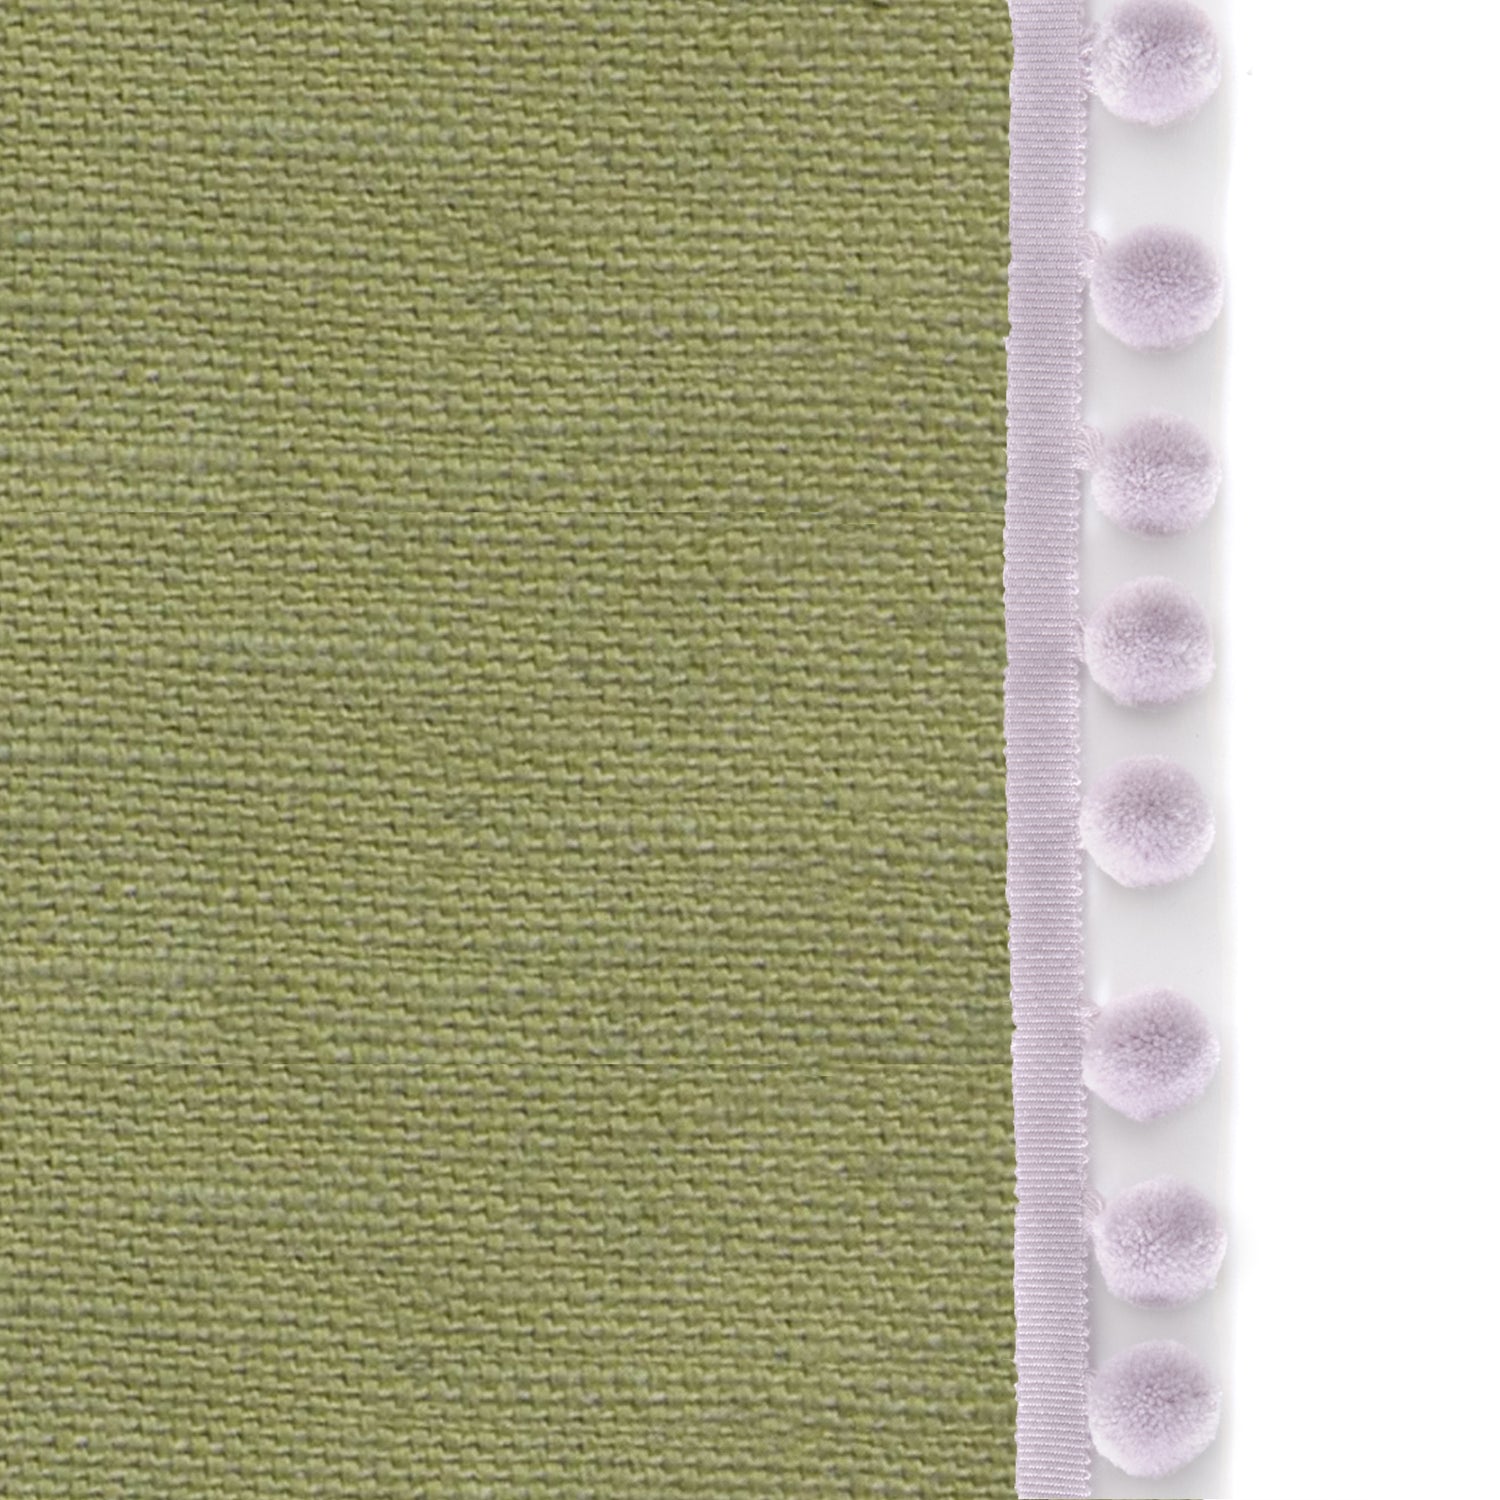 Upclose picture of Moss custom Moss Green Linencurtain with lilac pom pom trim